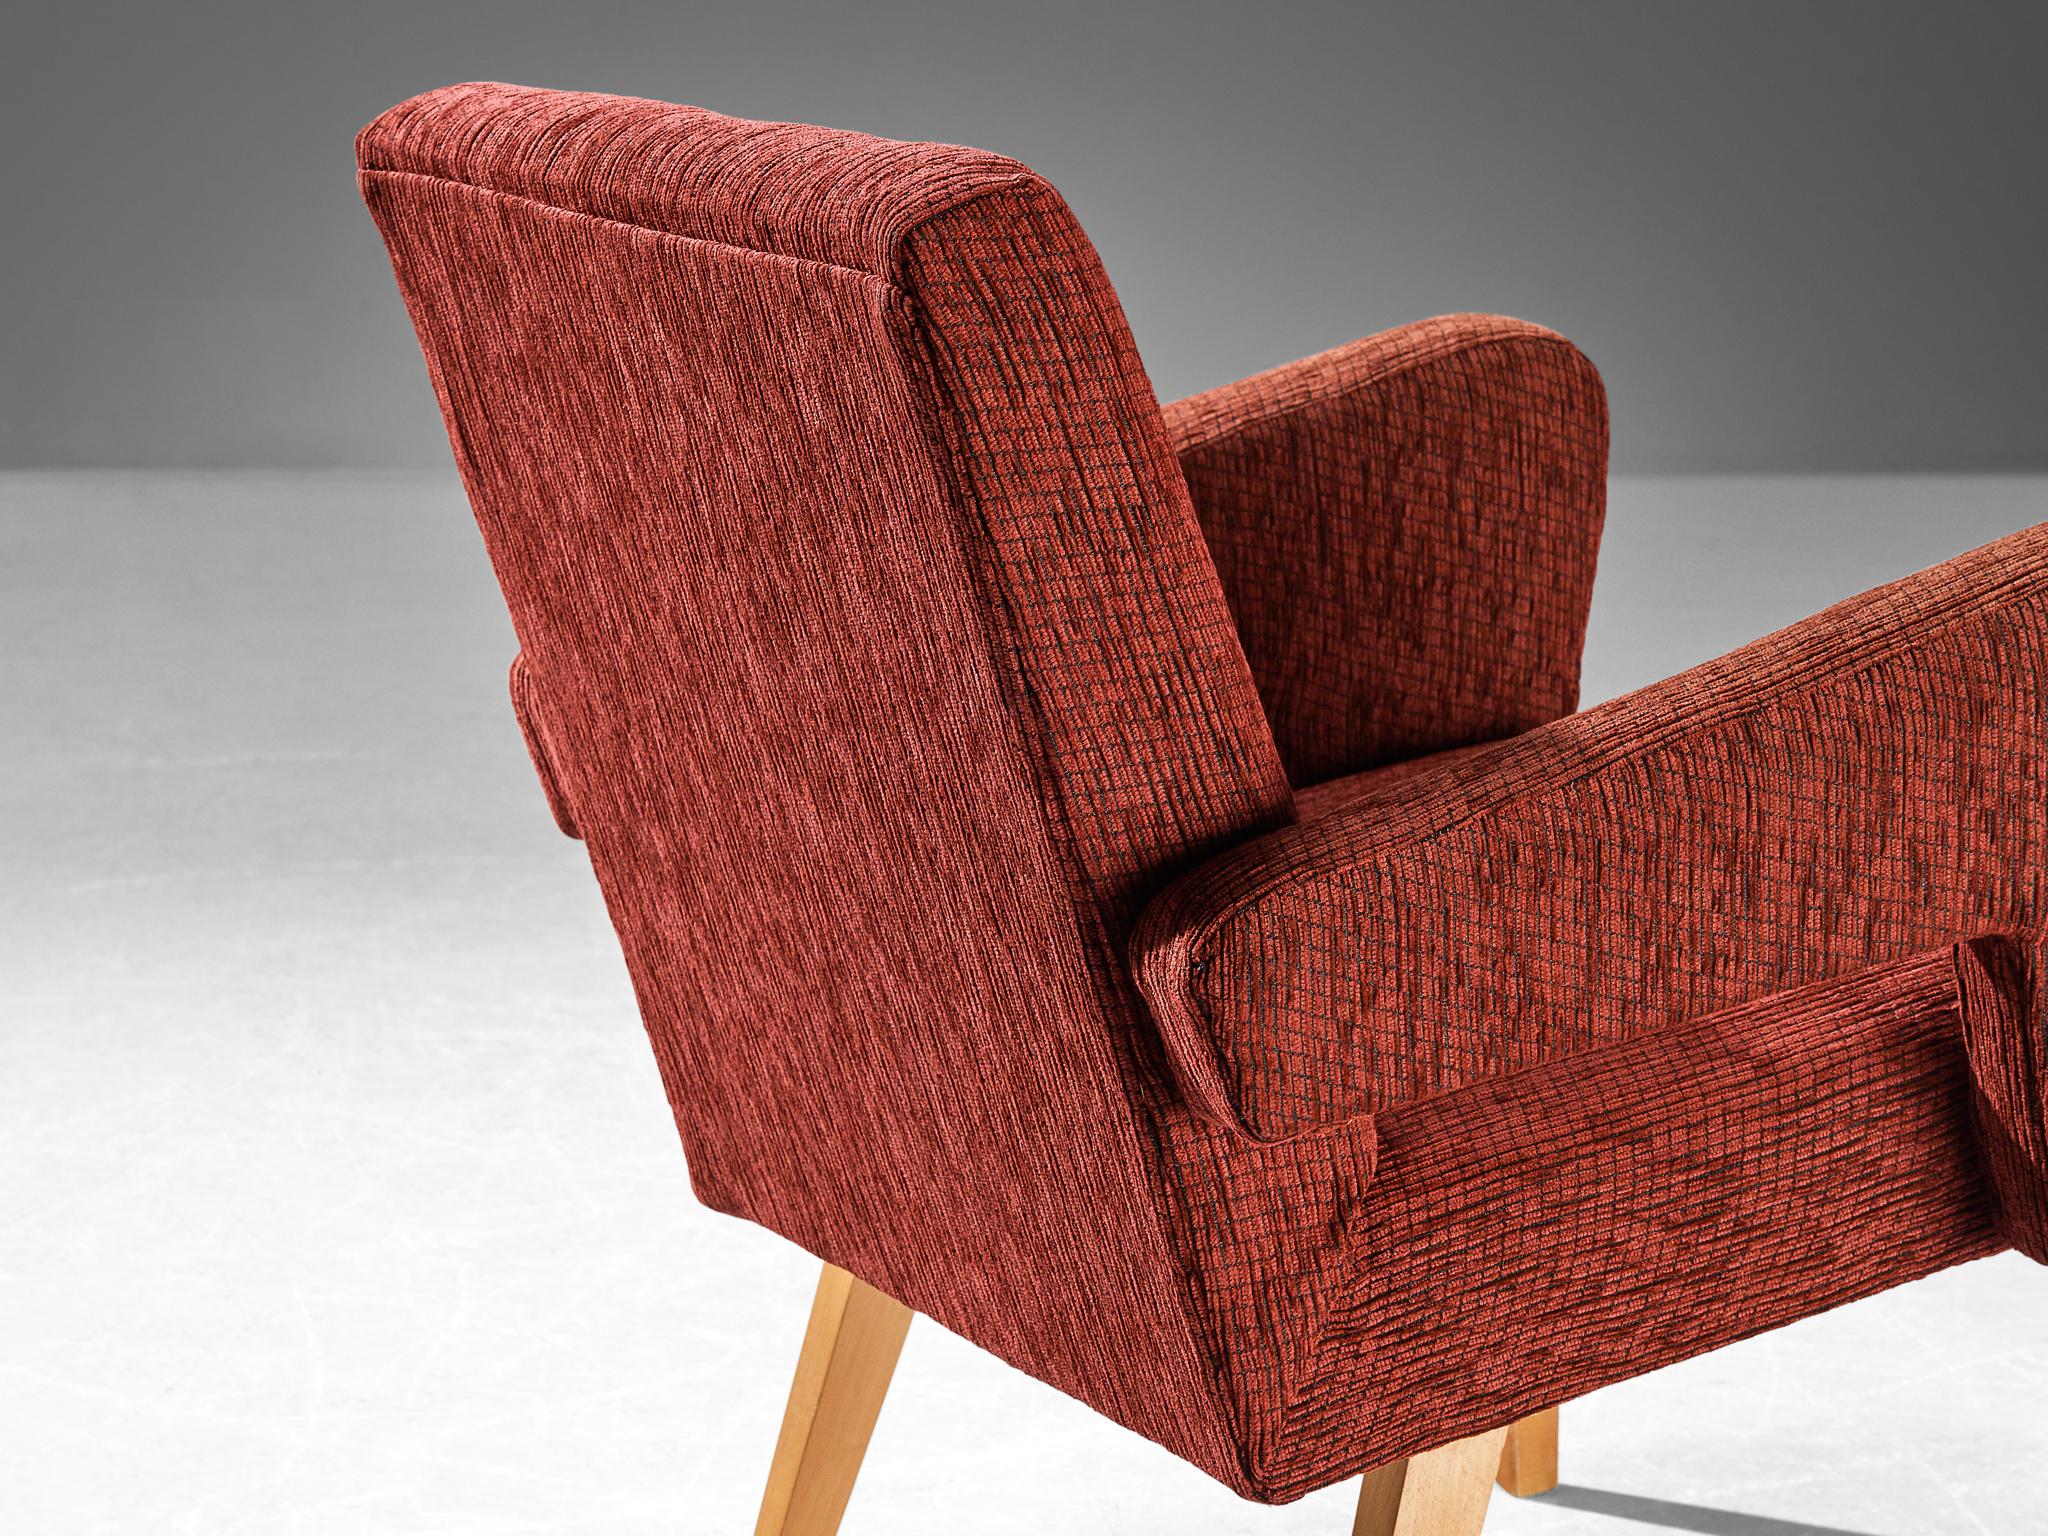 Pair of Angular Armchairs in Red Upholstery